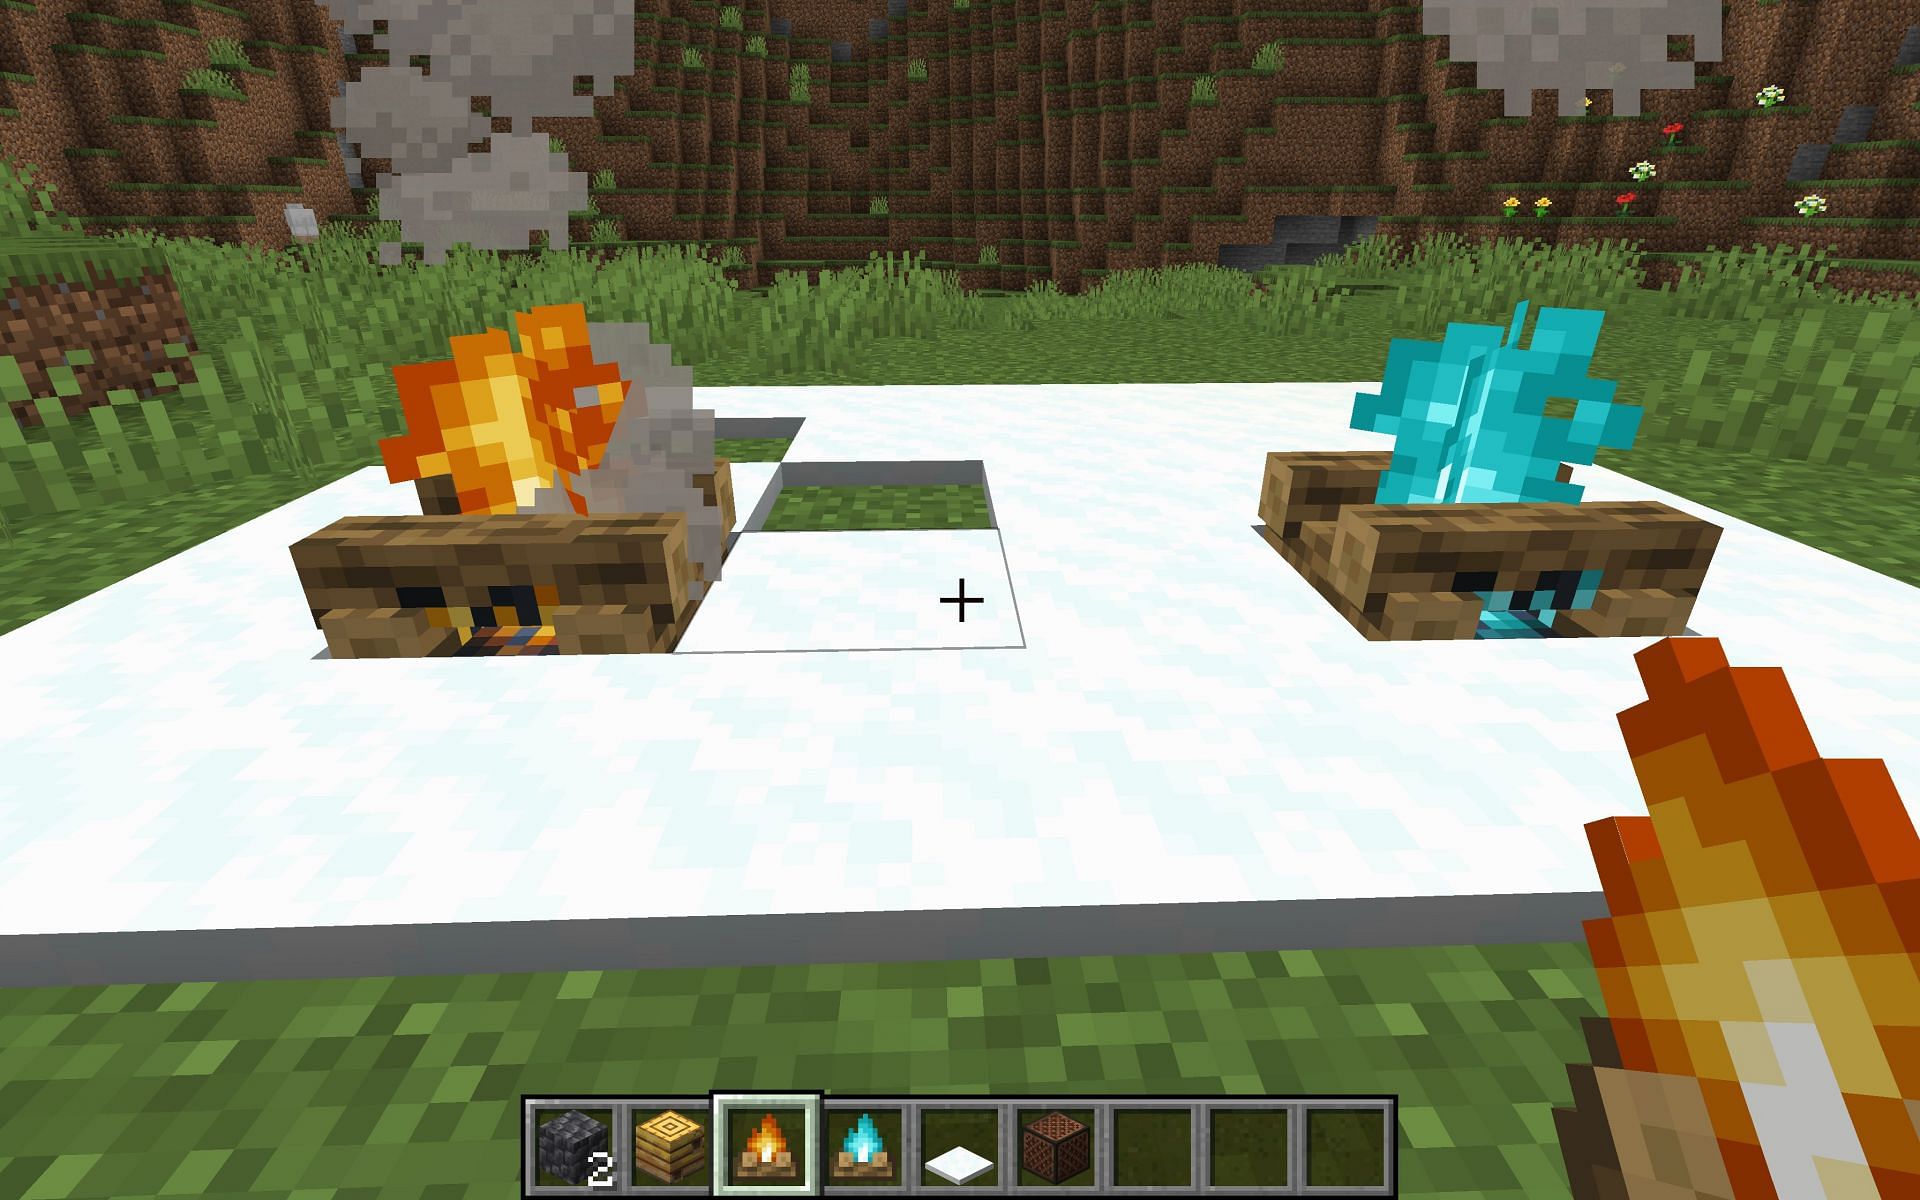 Each fire handles snow and ice differently, the regular campfire will melt them, but the soul campfire will not (Image via Mojang)